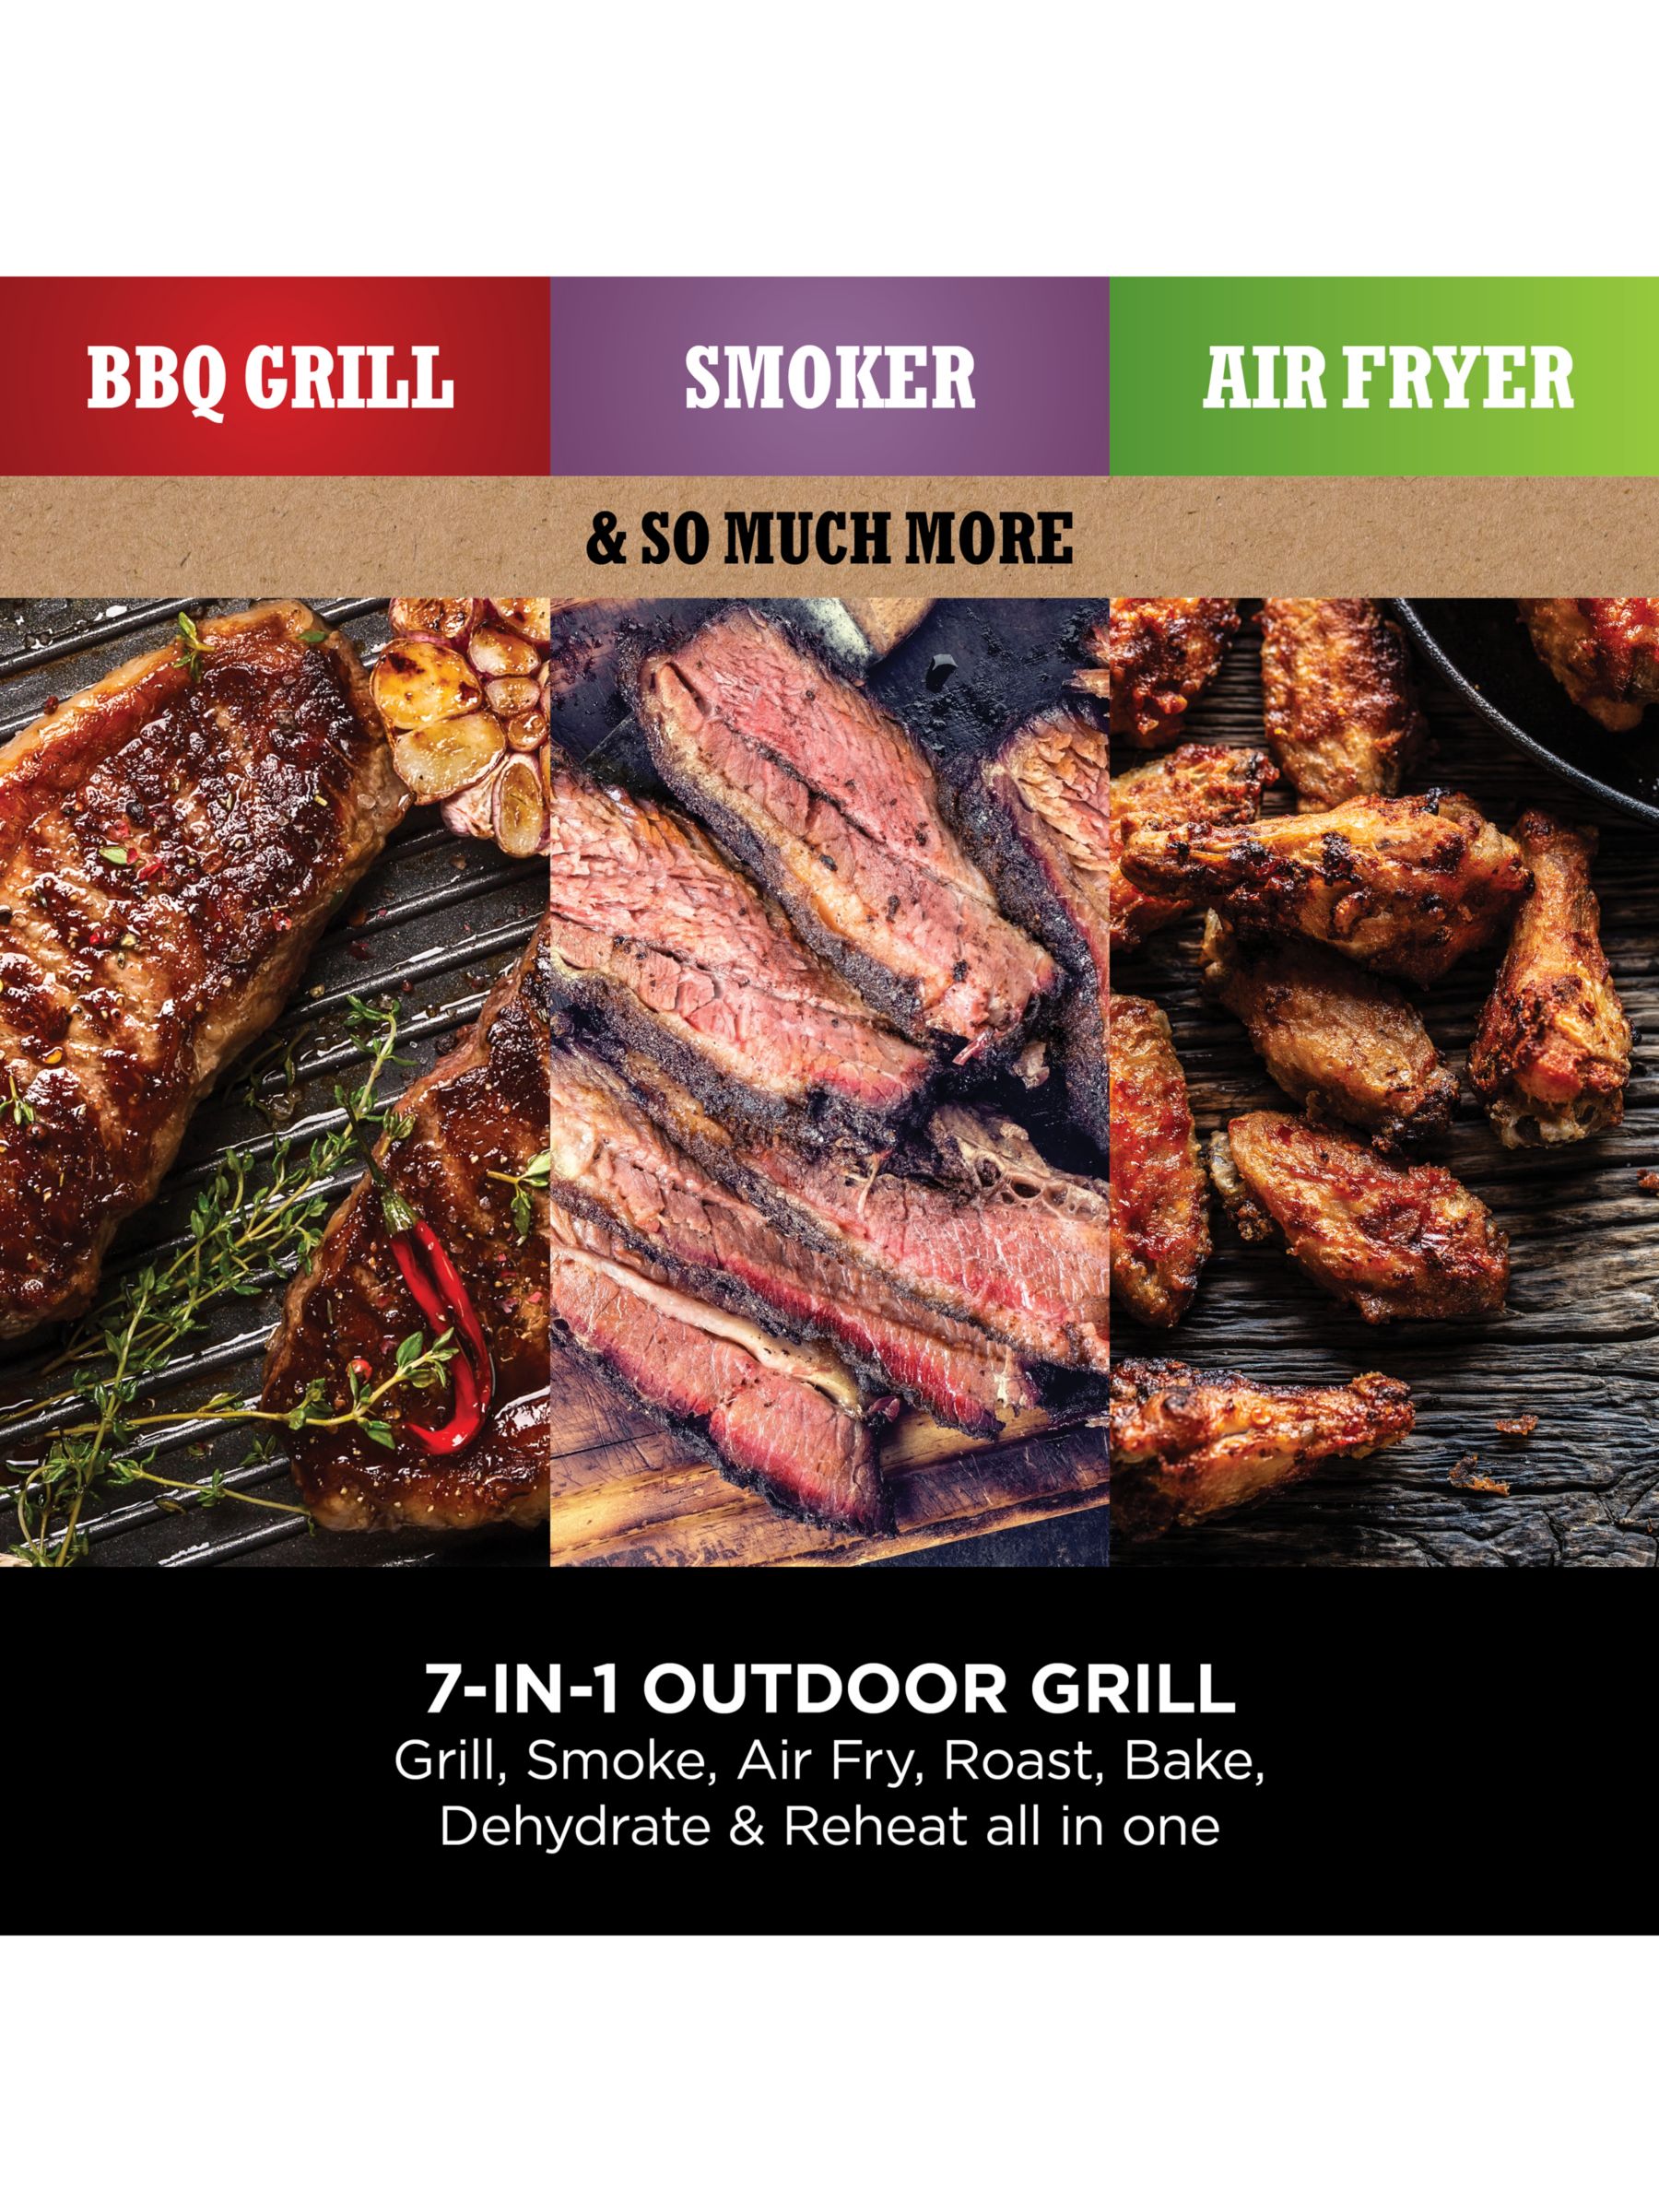 NINJA WoodFire Outdoor Grill 7-in-1 BBQ Smoker Air Fryer OG701 Review Makes  Amazing Smoked Ribs!!!! 